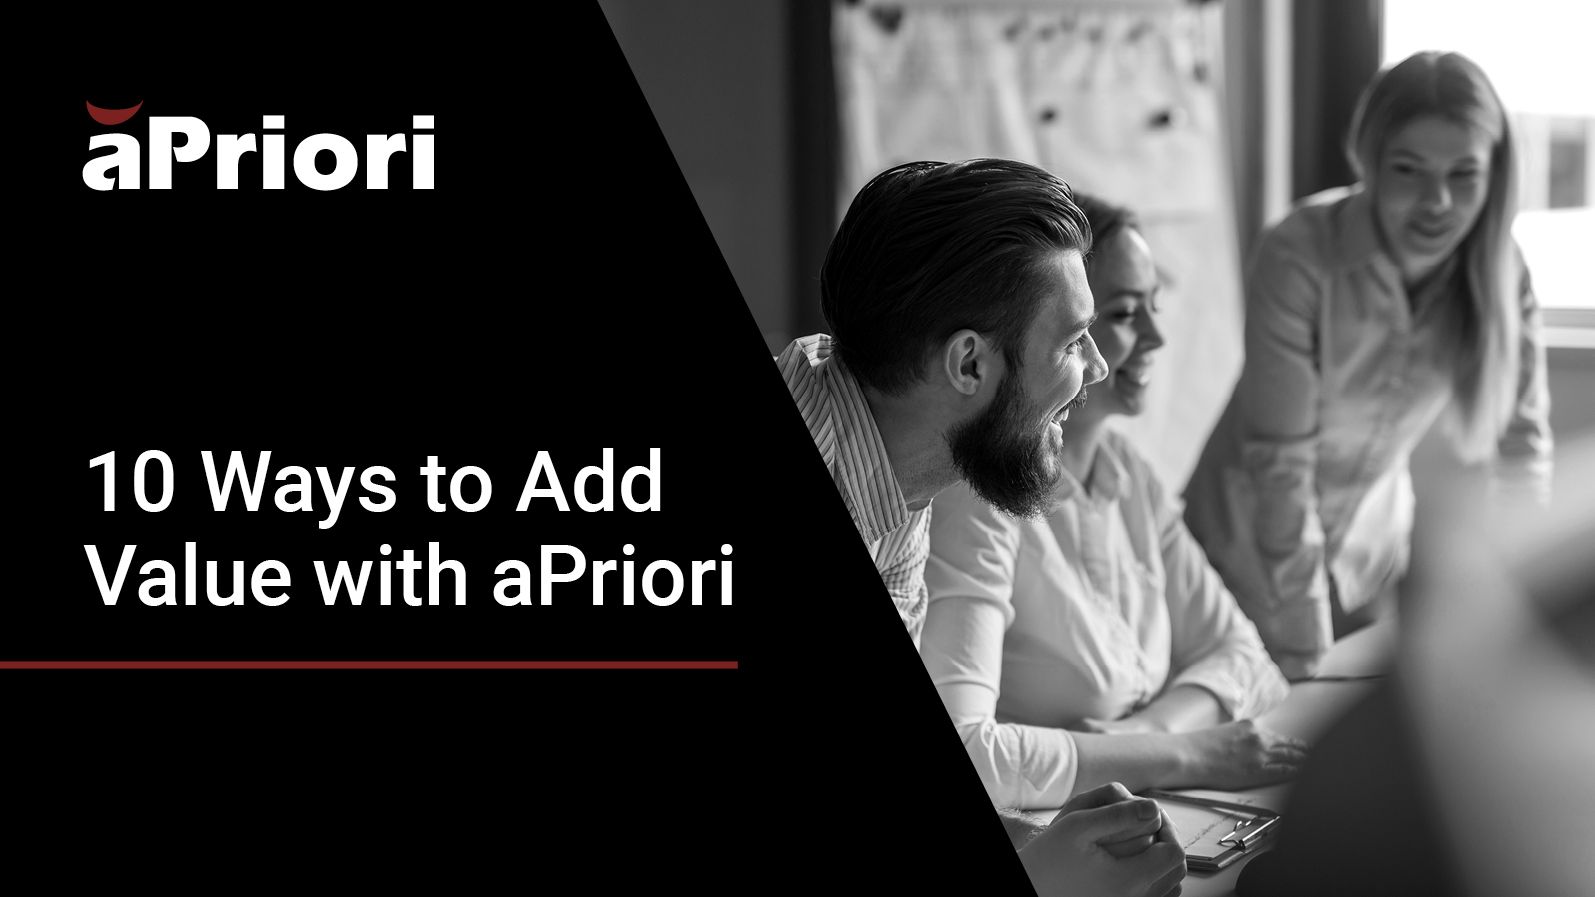 10 Ways To Add Value With aPriori